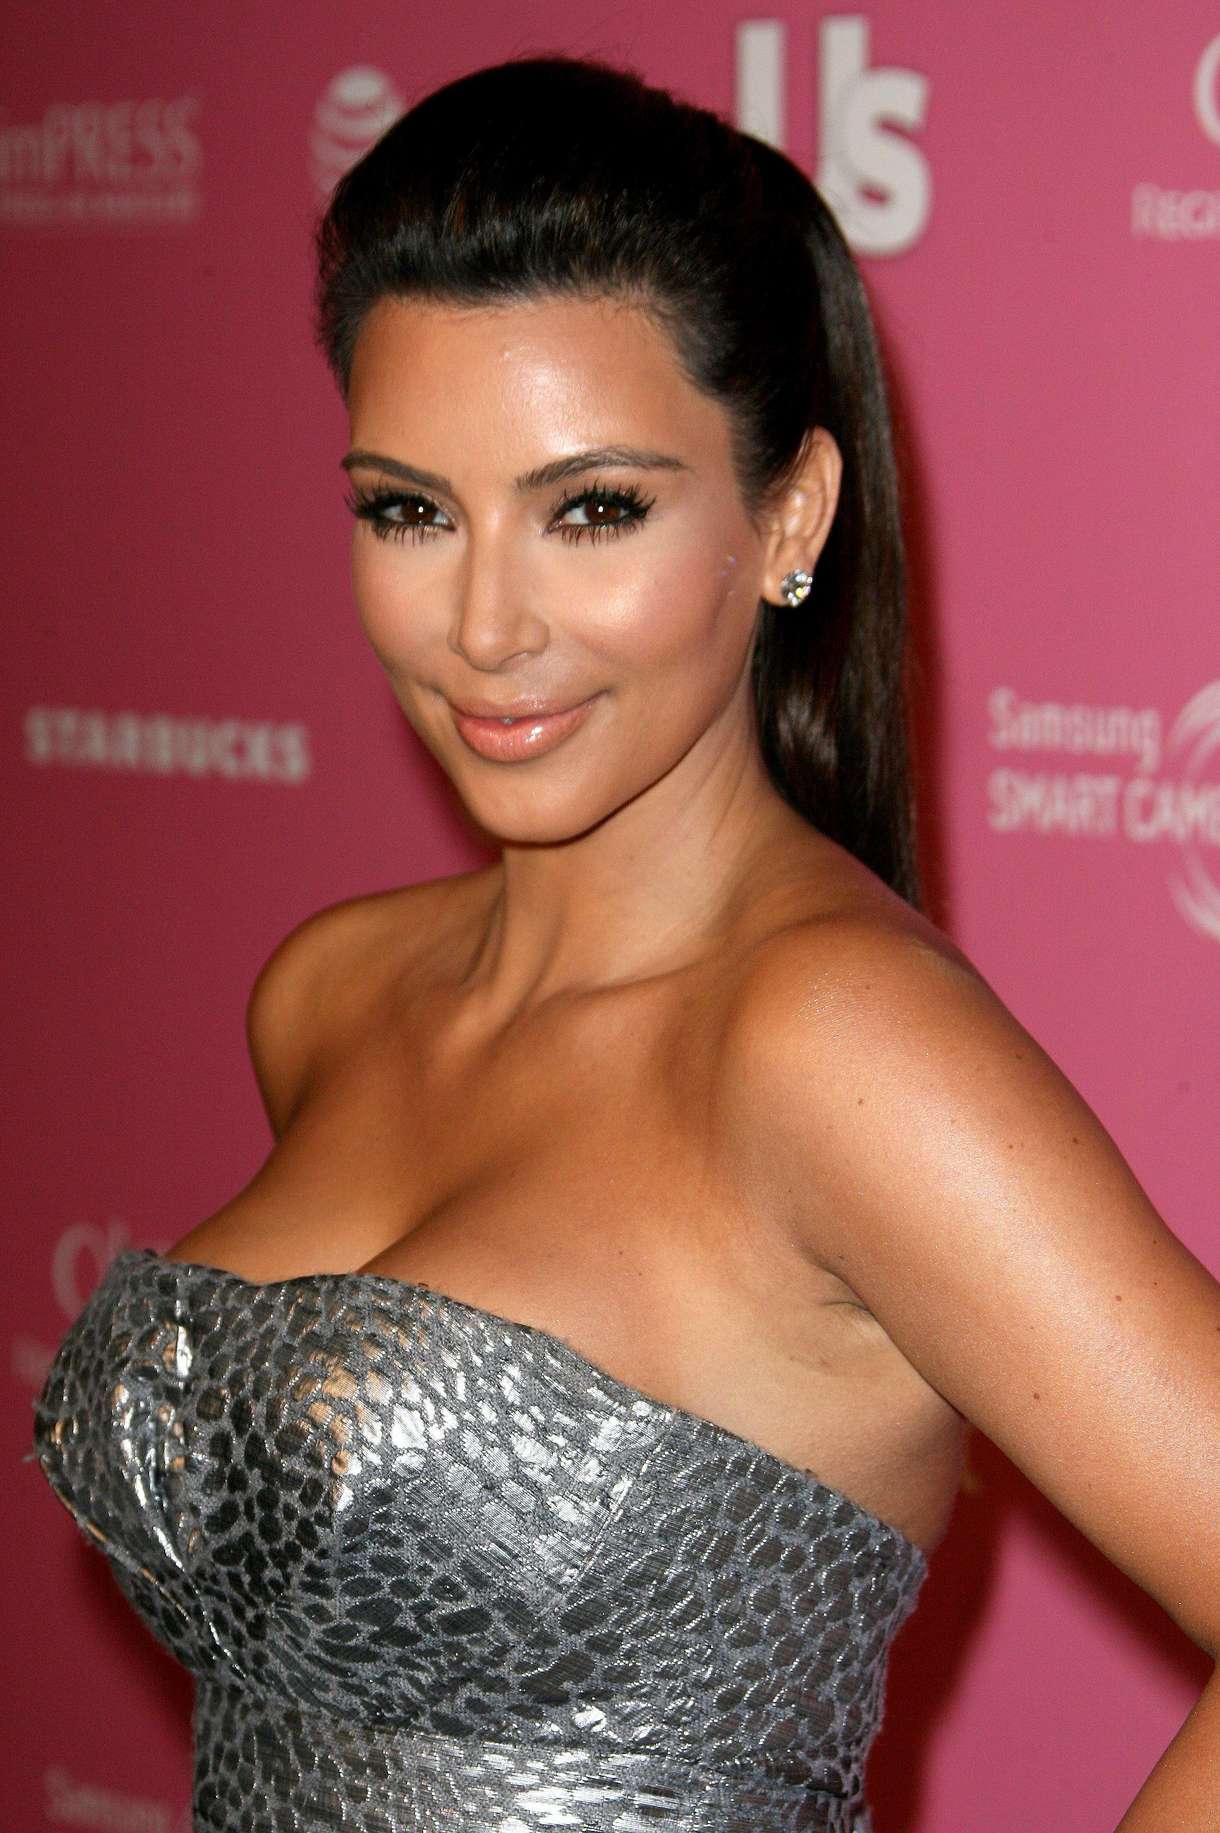 Kim Kardashian In a tight silver dress at 2012 US Weekly's Hot Hollywood Style Issue Event